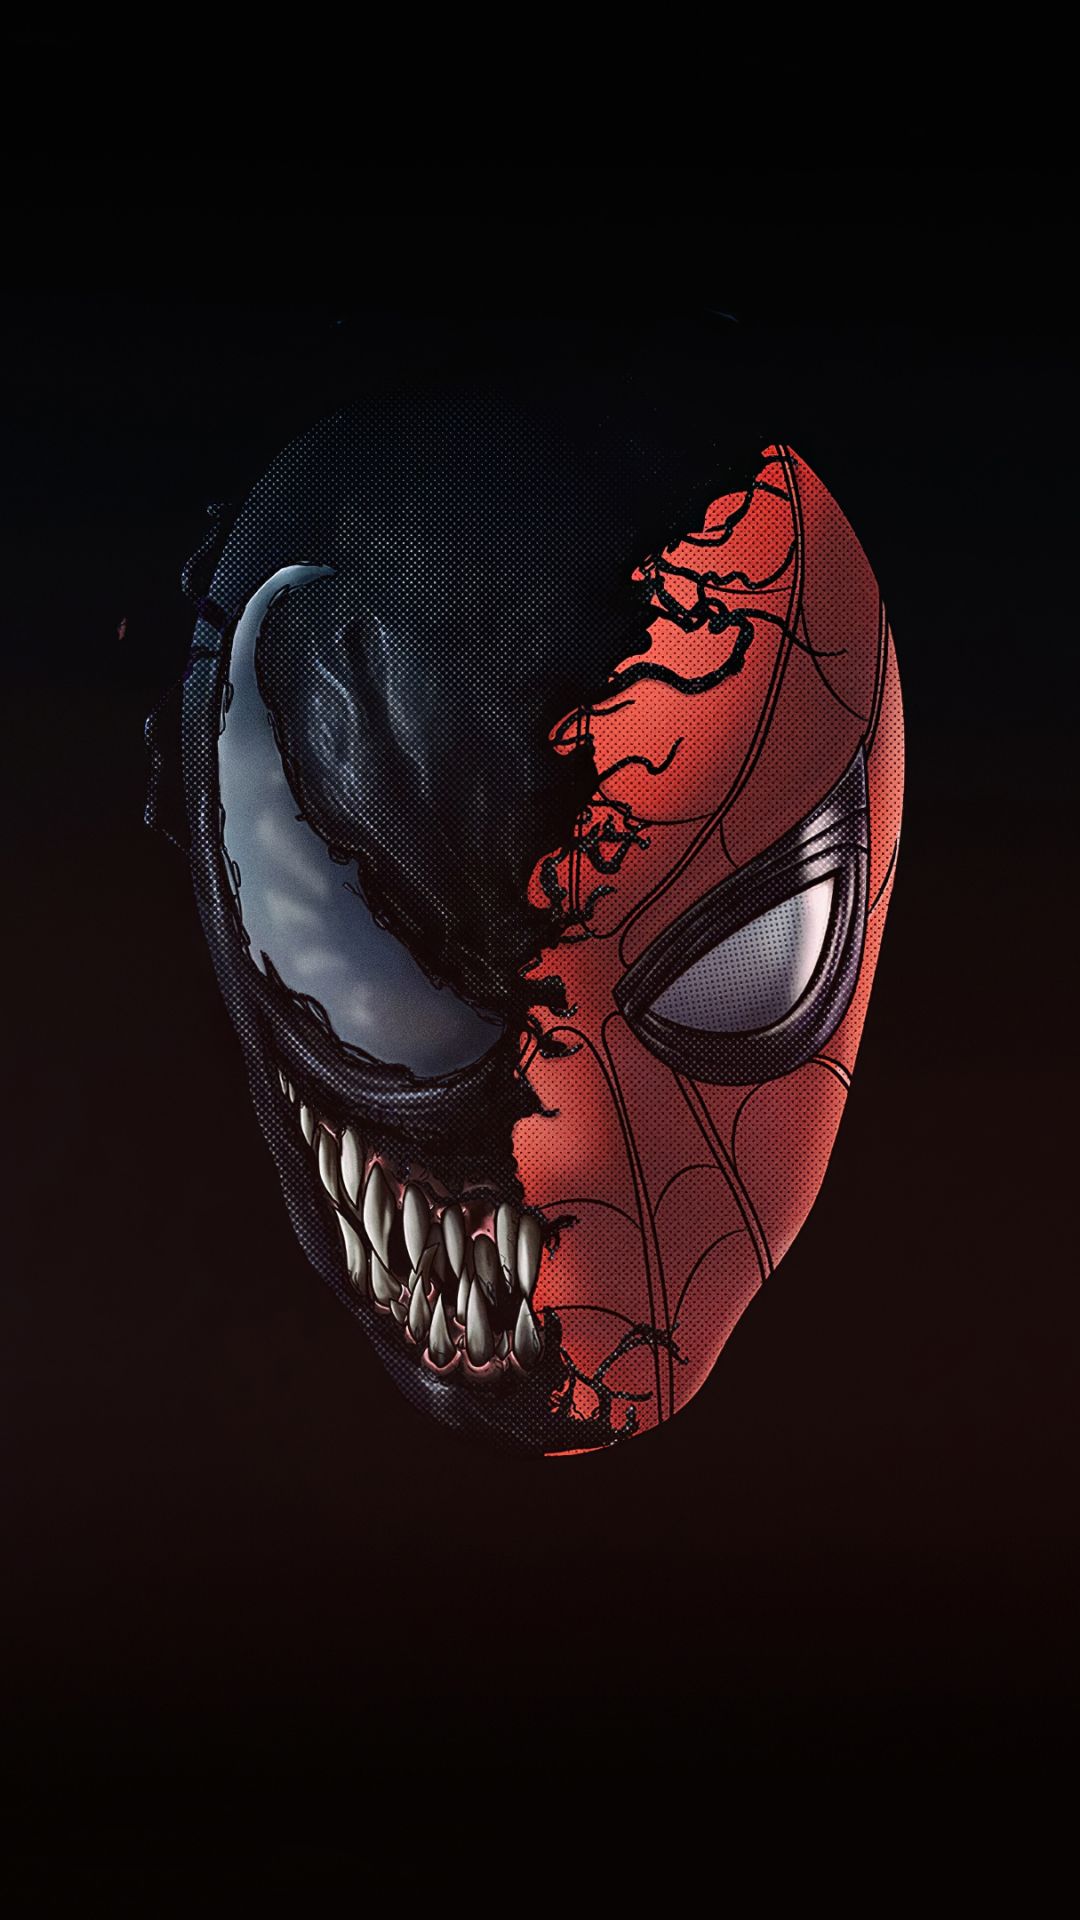 Spider Man and Venom iPhone 6s, 6 Plus and Pixel XL , One Plus 3t, 5 Wallpaper, HD Minimalist 4K Wallpaper, Image, Photo and Background